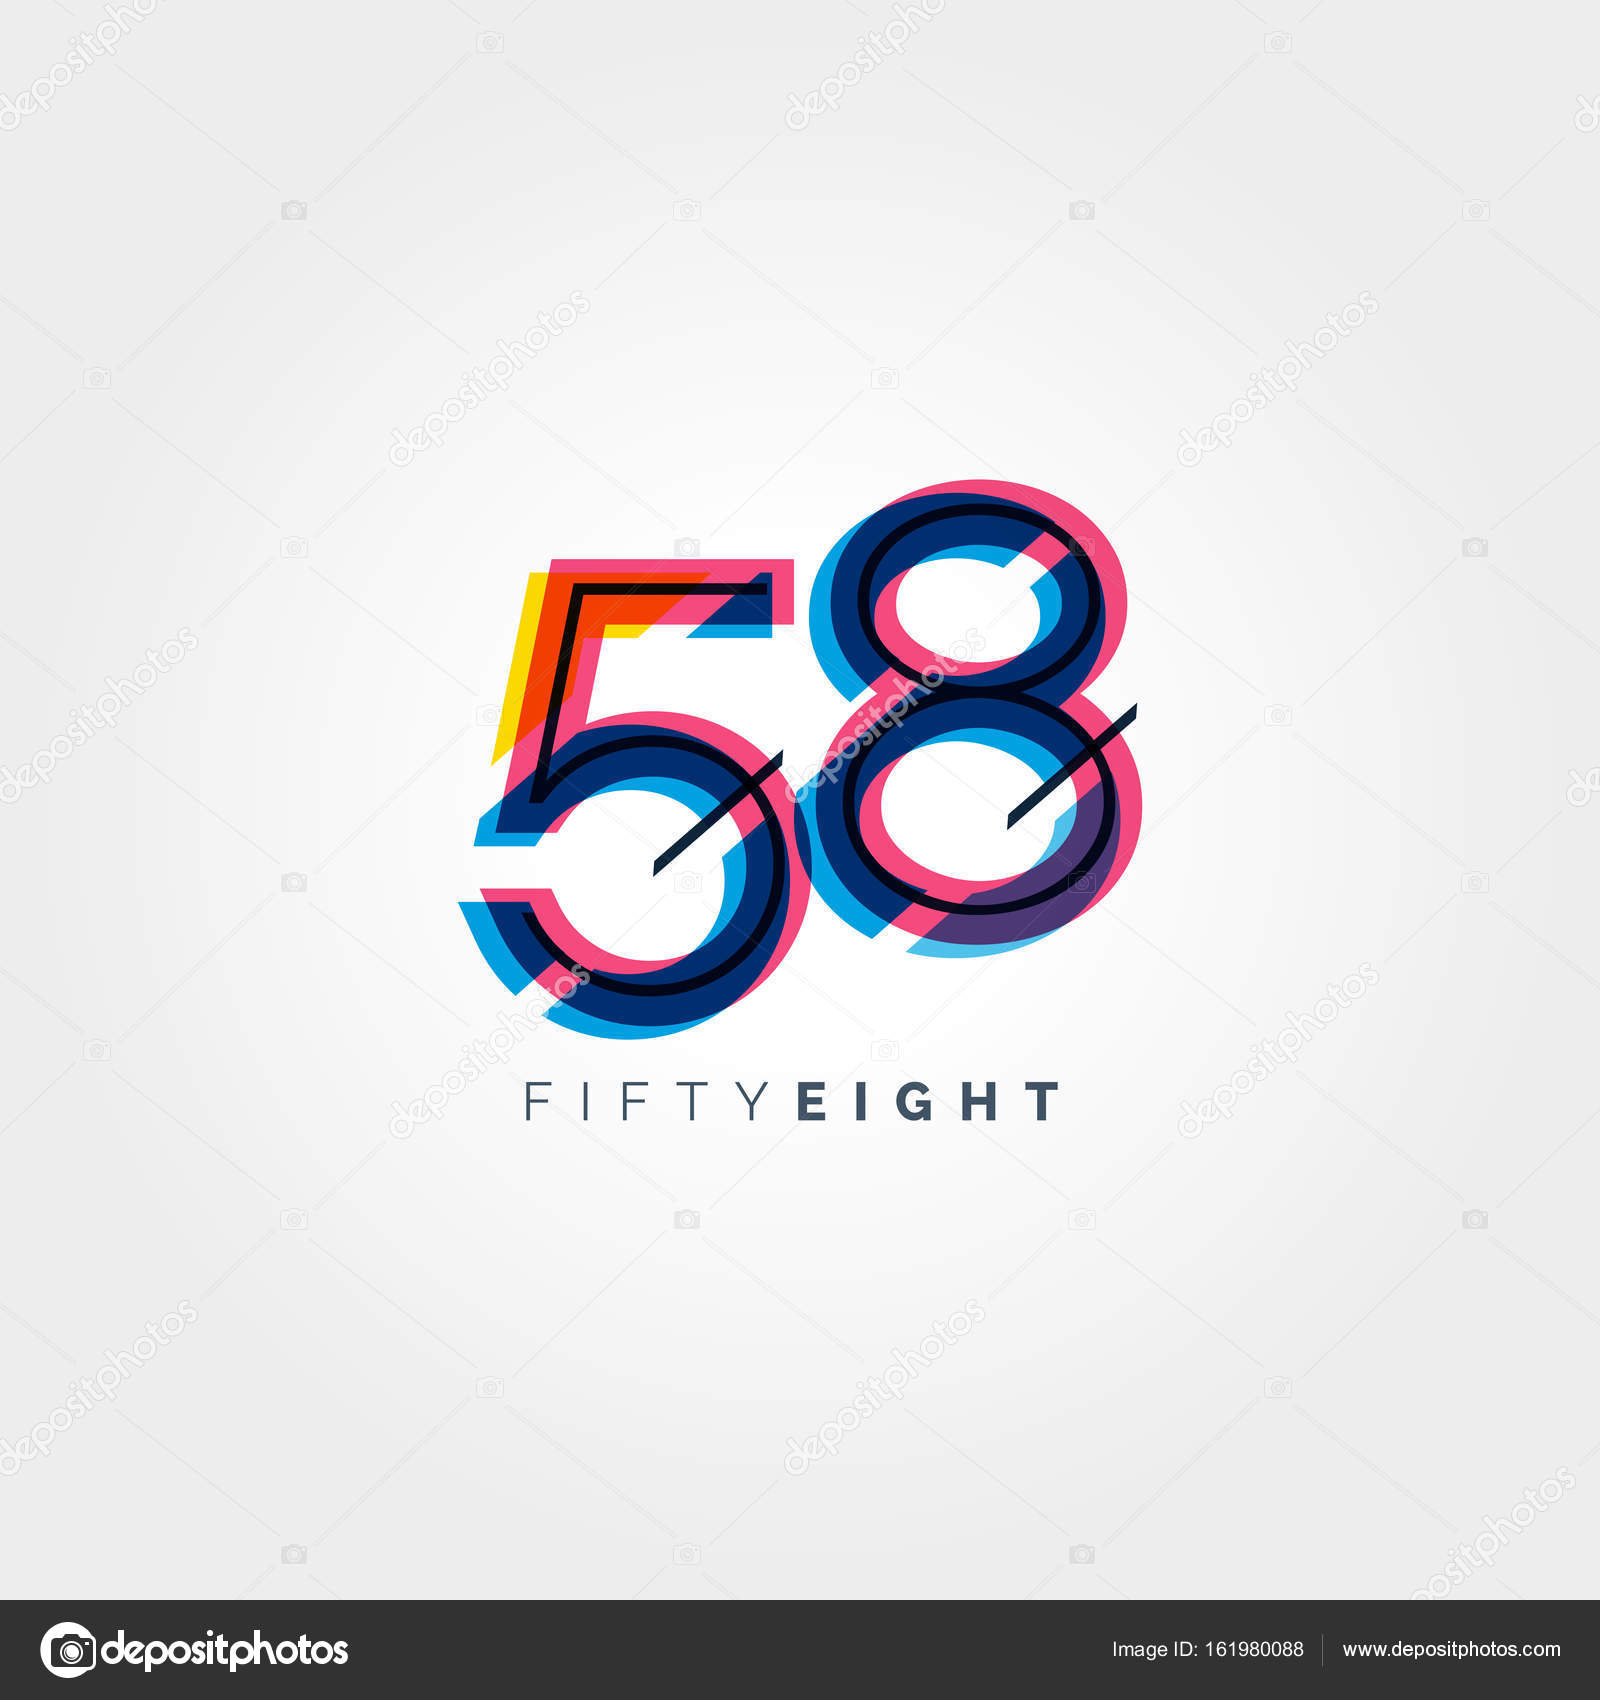 digit-contemporary-number-58-logo-stock-vector-by-brainbistro-161980088